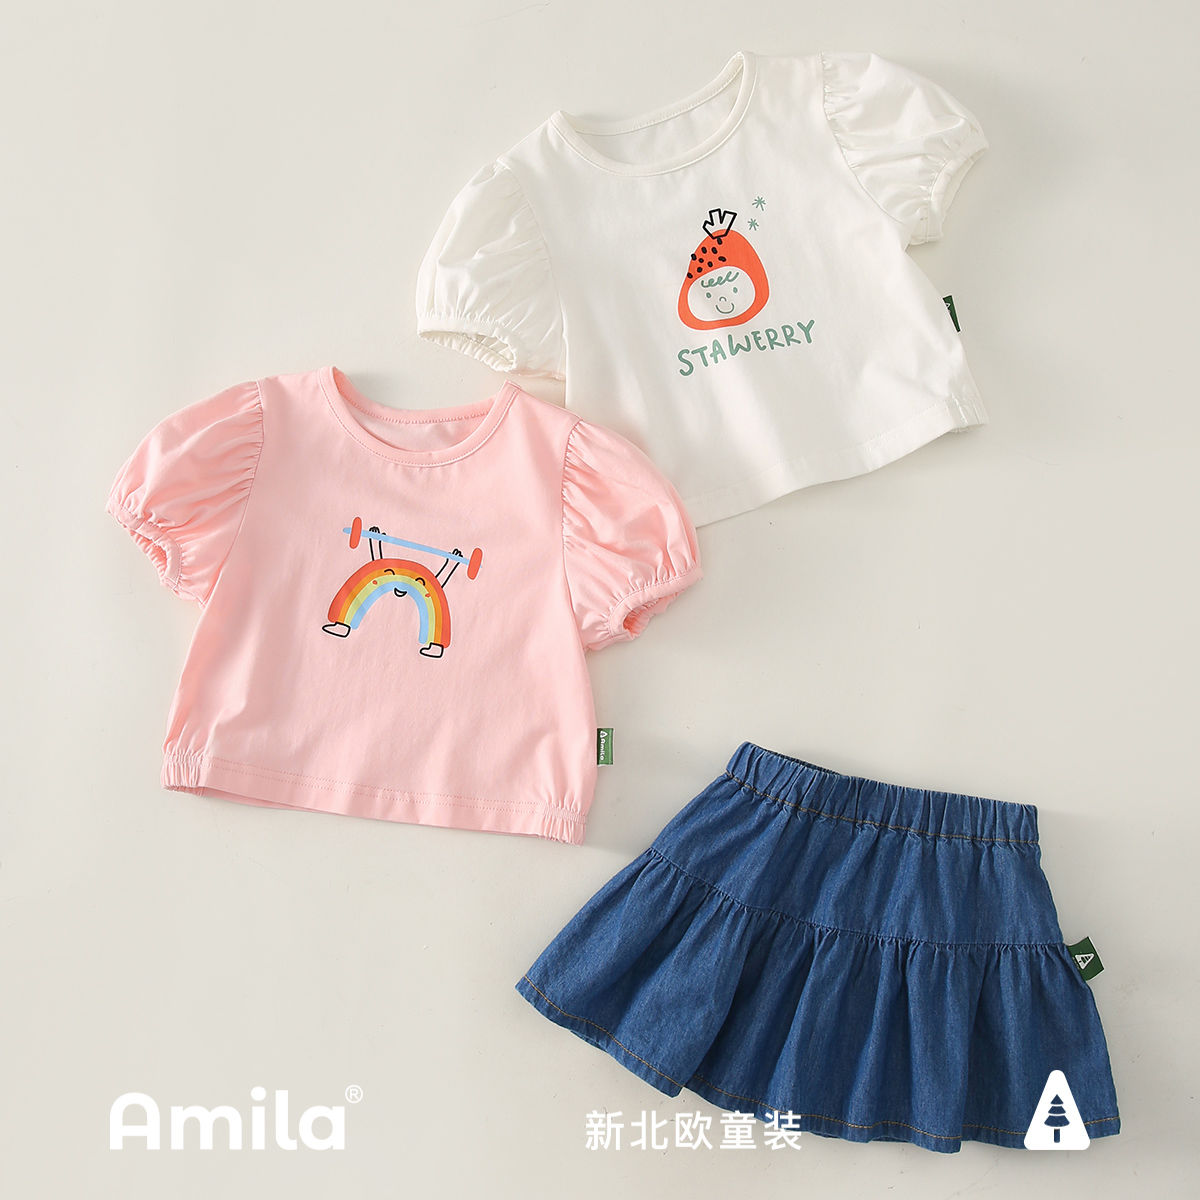 Amila children's wear 2022 summer new baby girl cotton short-sleeved T-shirt short skirt foreign style suit skin-friendly two-piece set